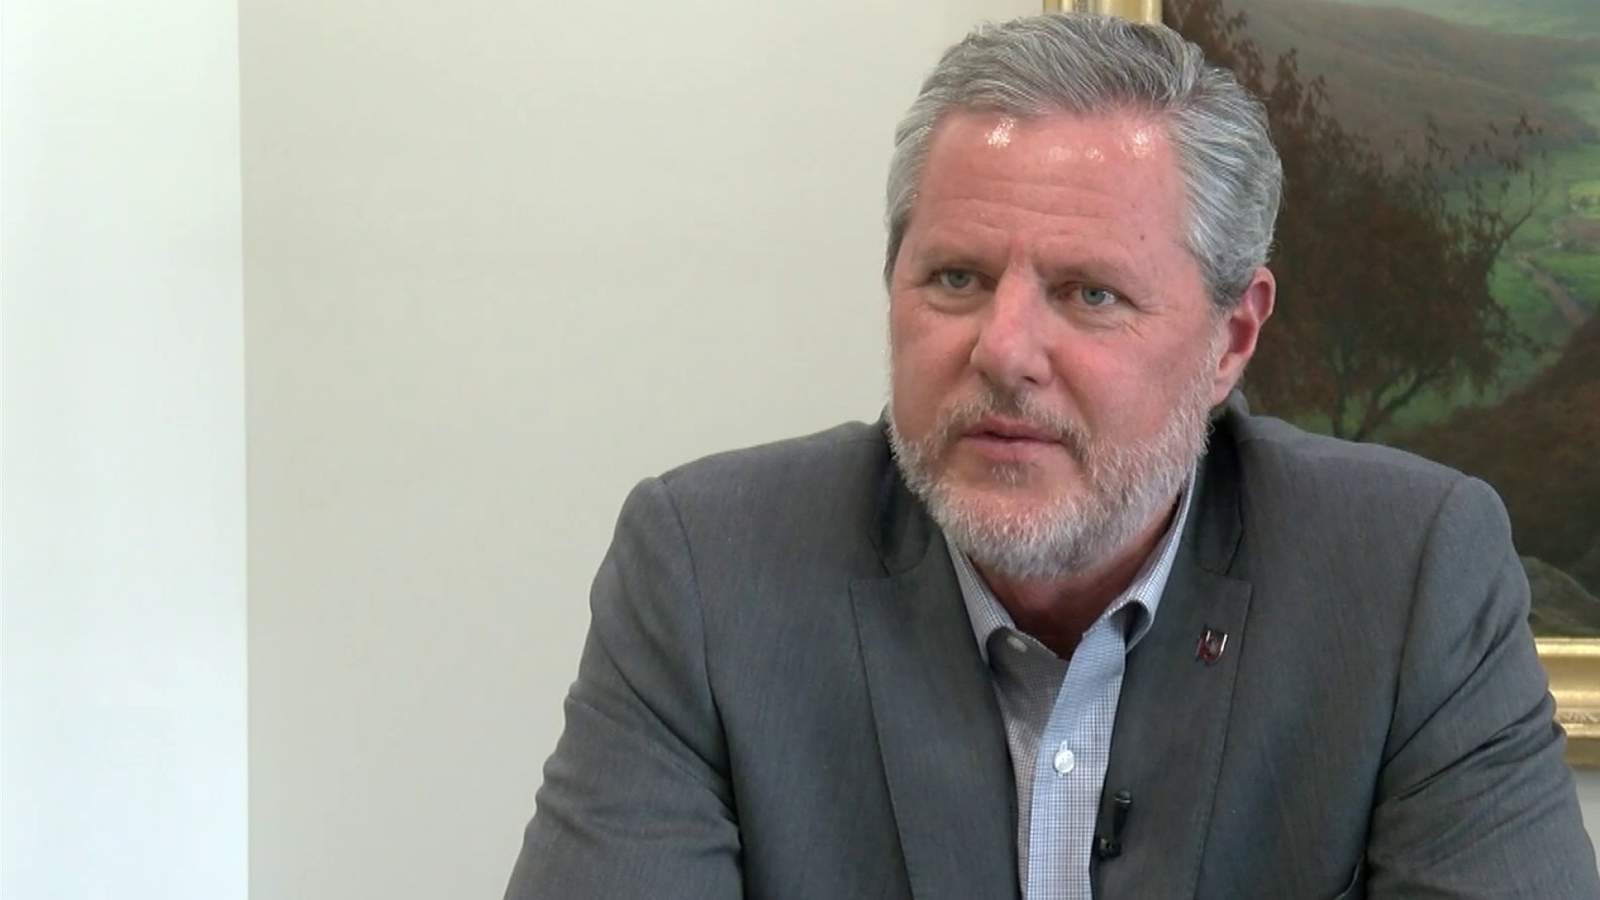 Jerry Falwell Jr. explains ‘civil disobedience’ comments ahead of Monday’s gun-rights rally